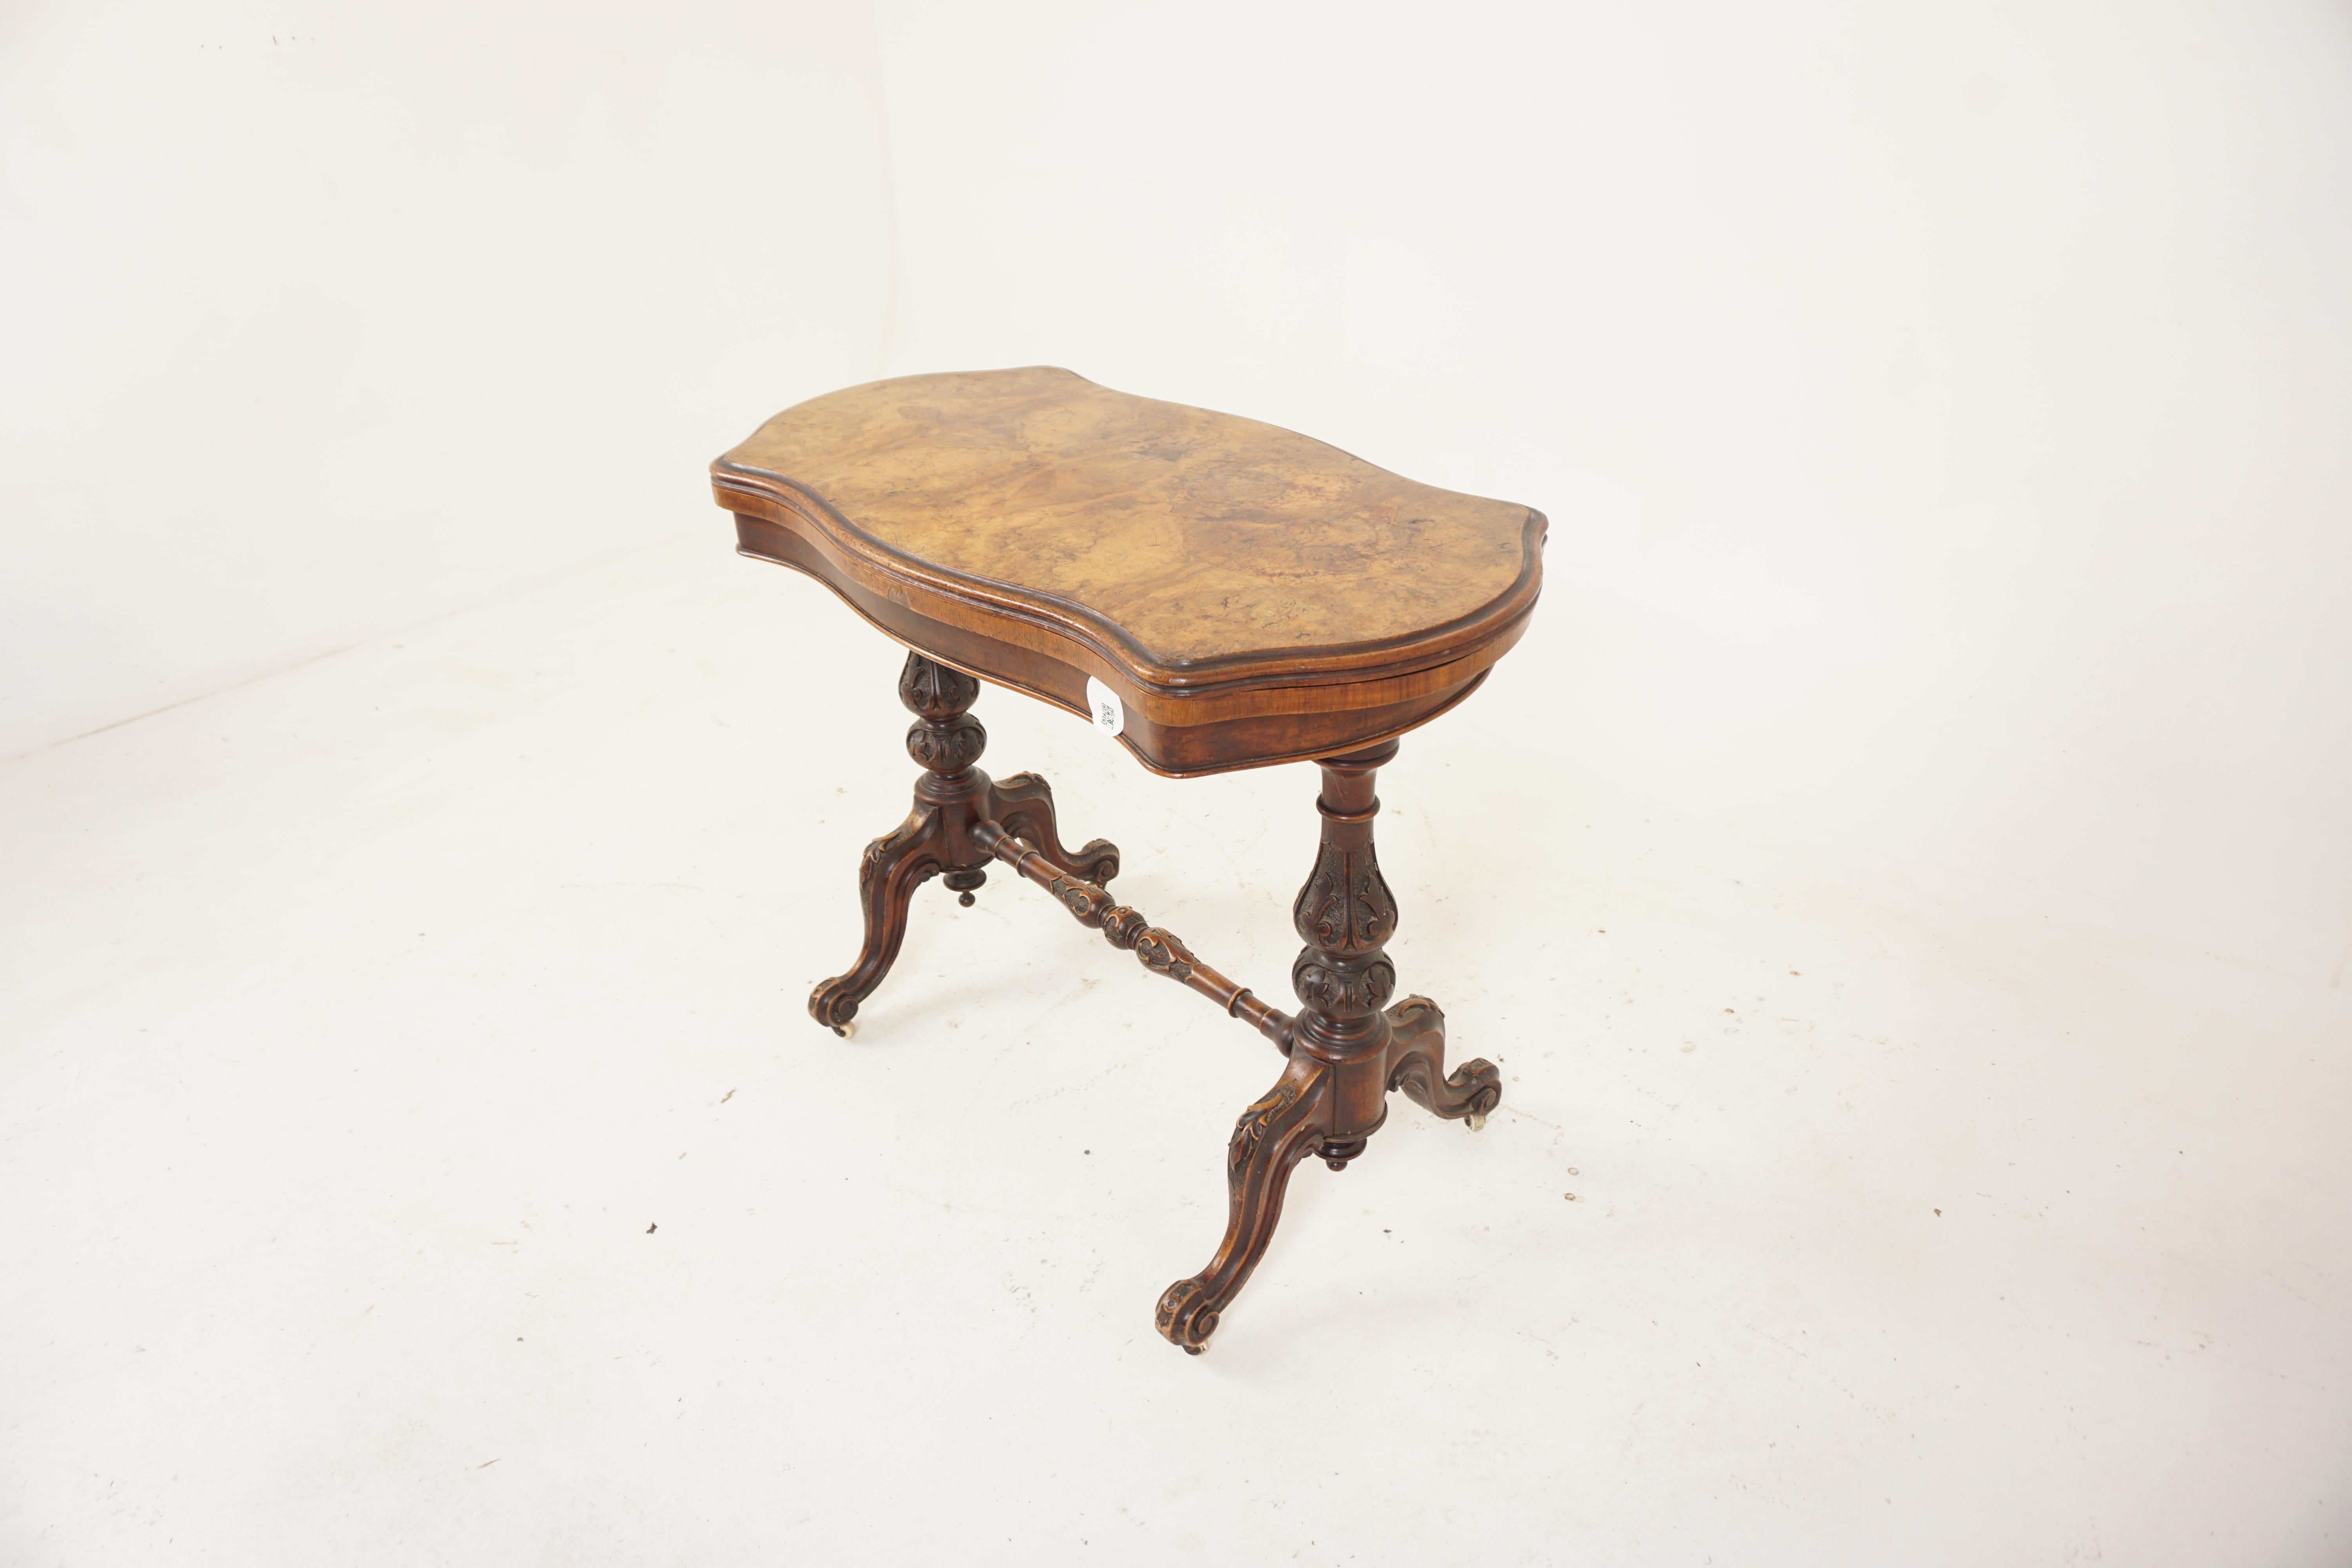 Victorian burr walnut turn over games table, tea table, Scotland 1870, H668

Scotland 1870
Solid walnut and veneer
Original Finish
Shaped moulded top
The top turn 90 degrees and opens to reveal the leather top playing surface
All standing on a pair